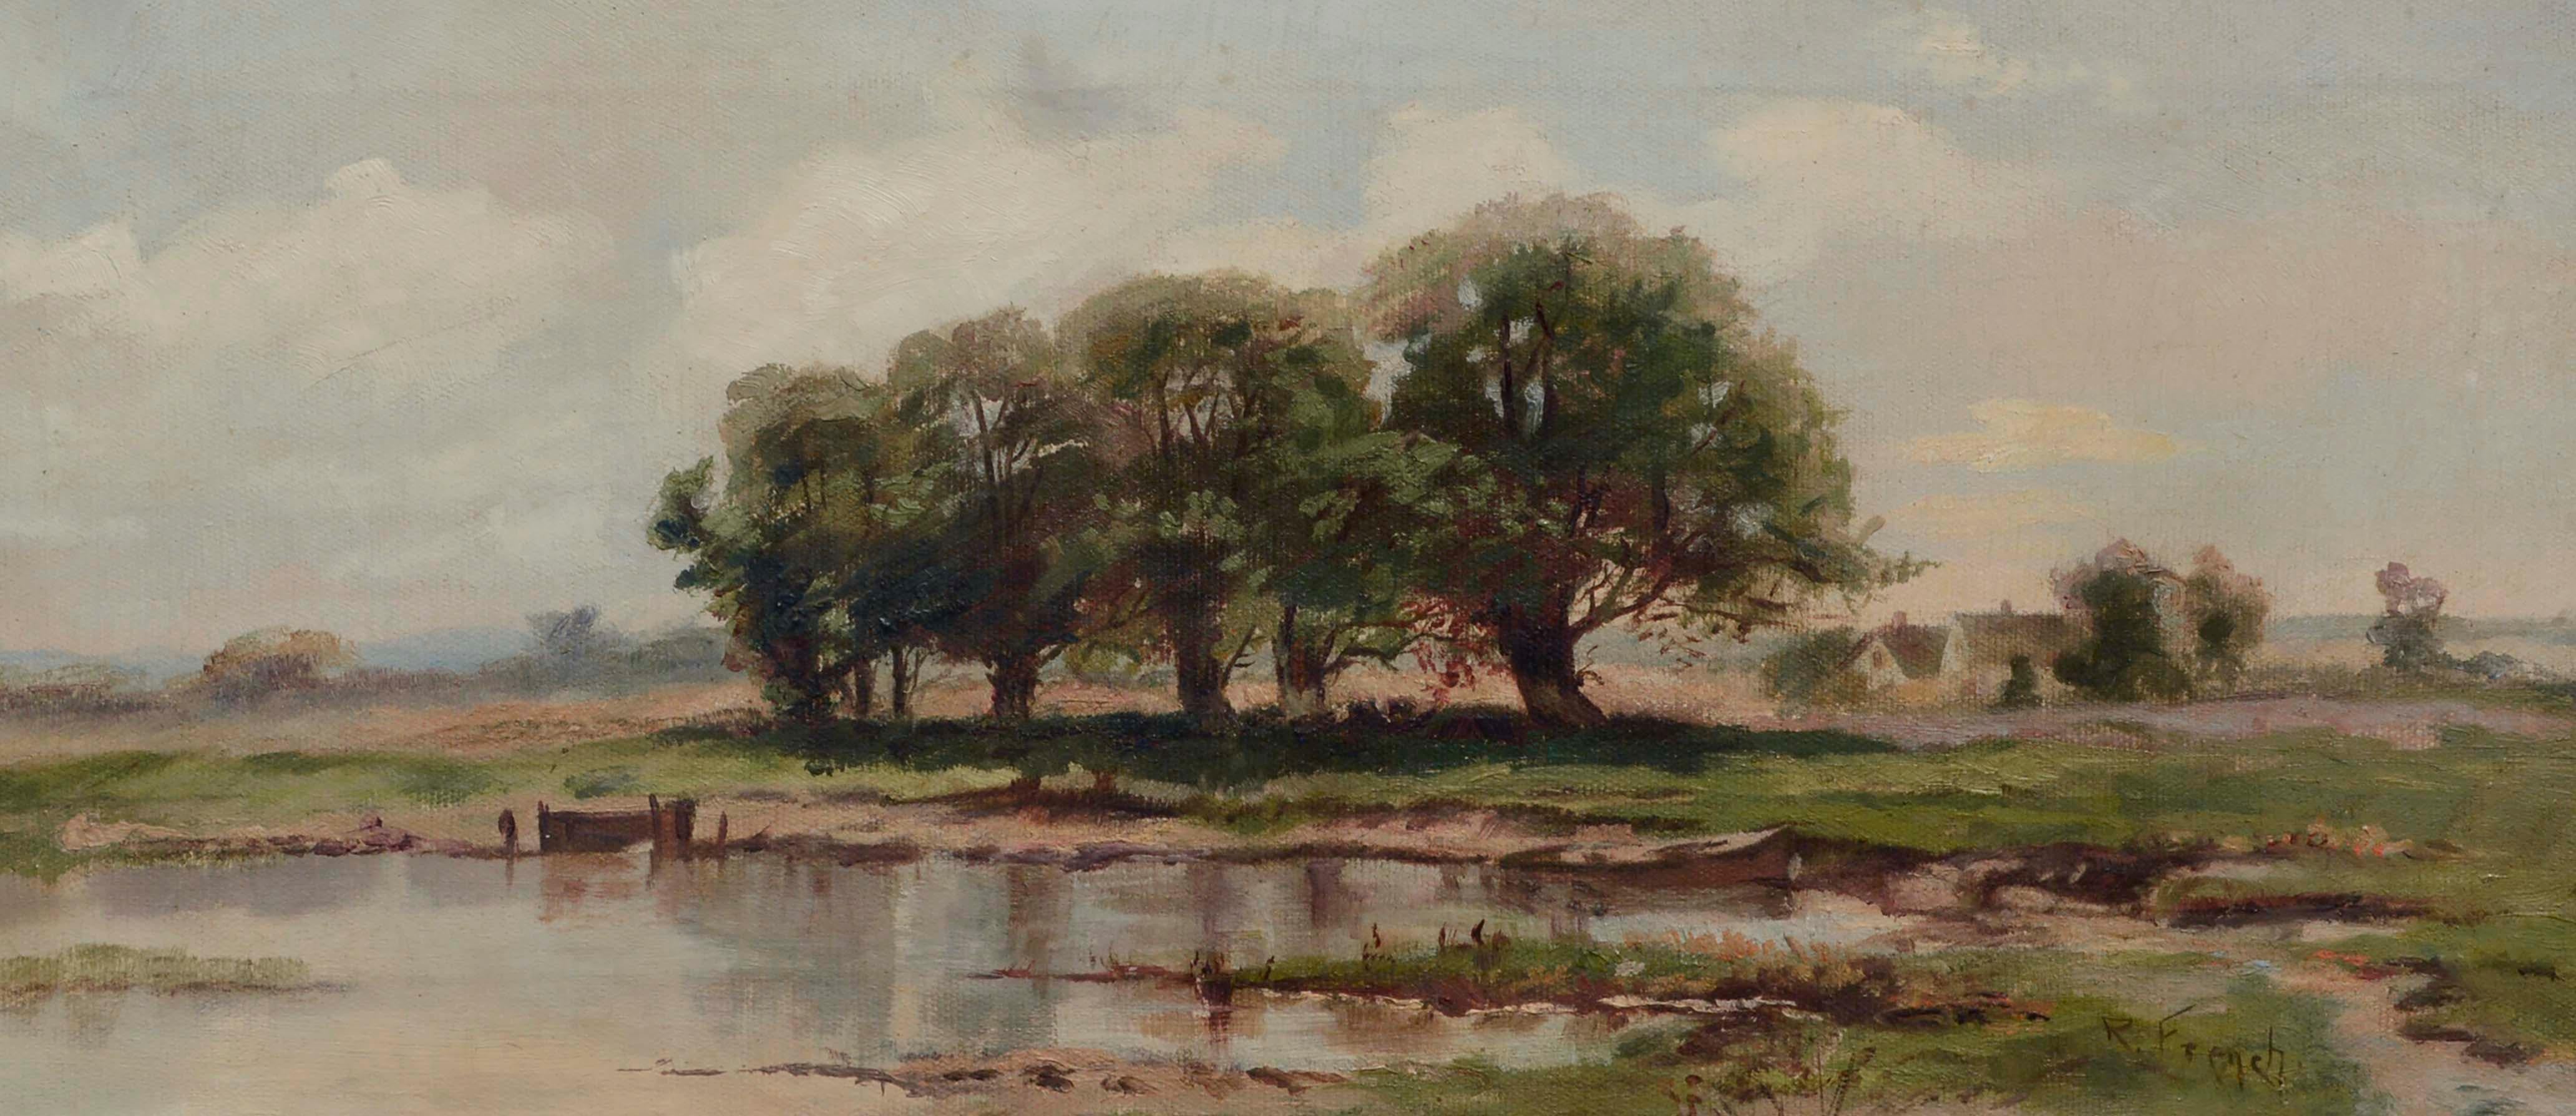 Dunnigan, CA Landscape - Painting by Restora French